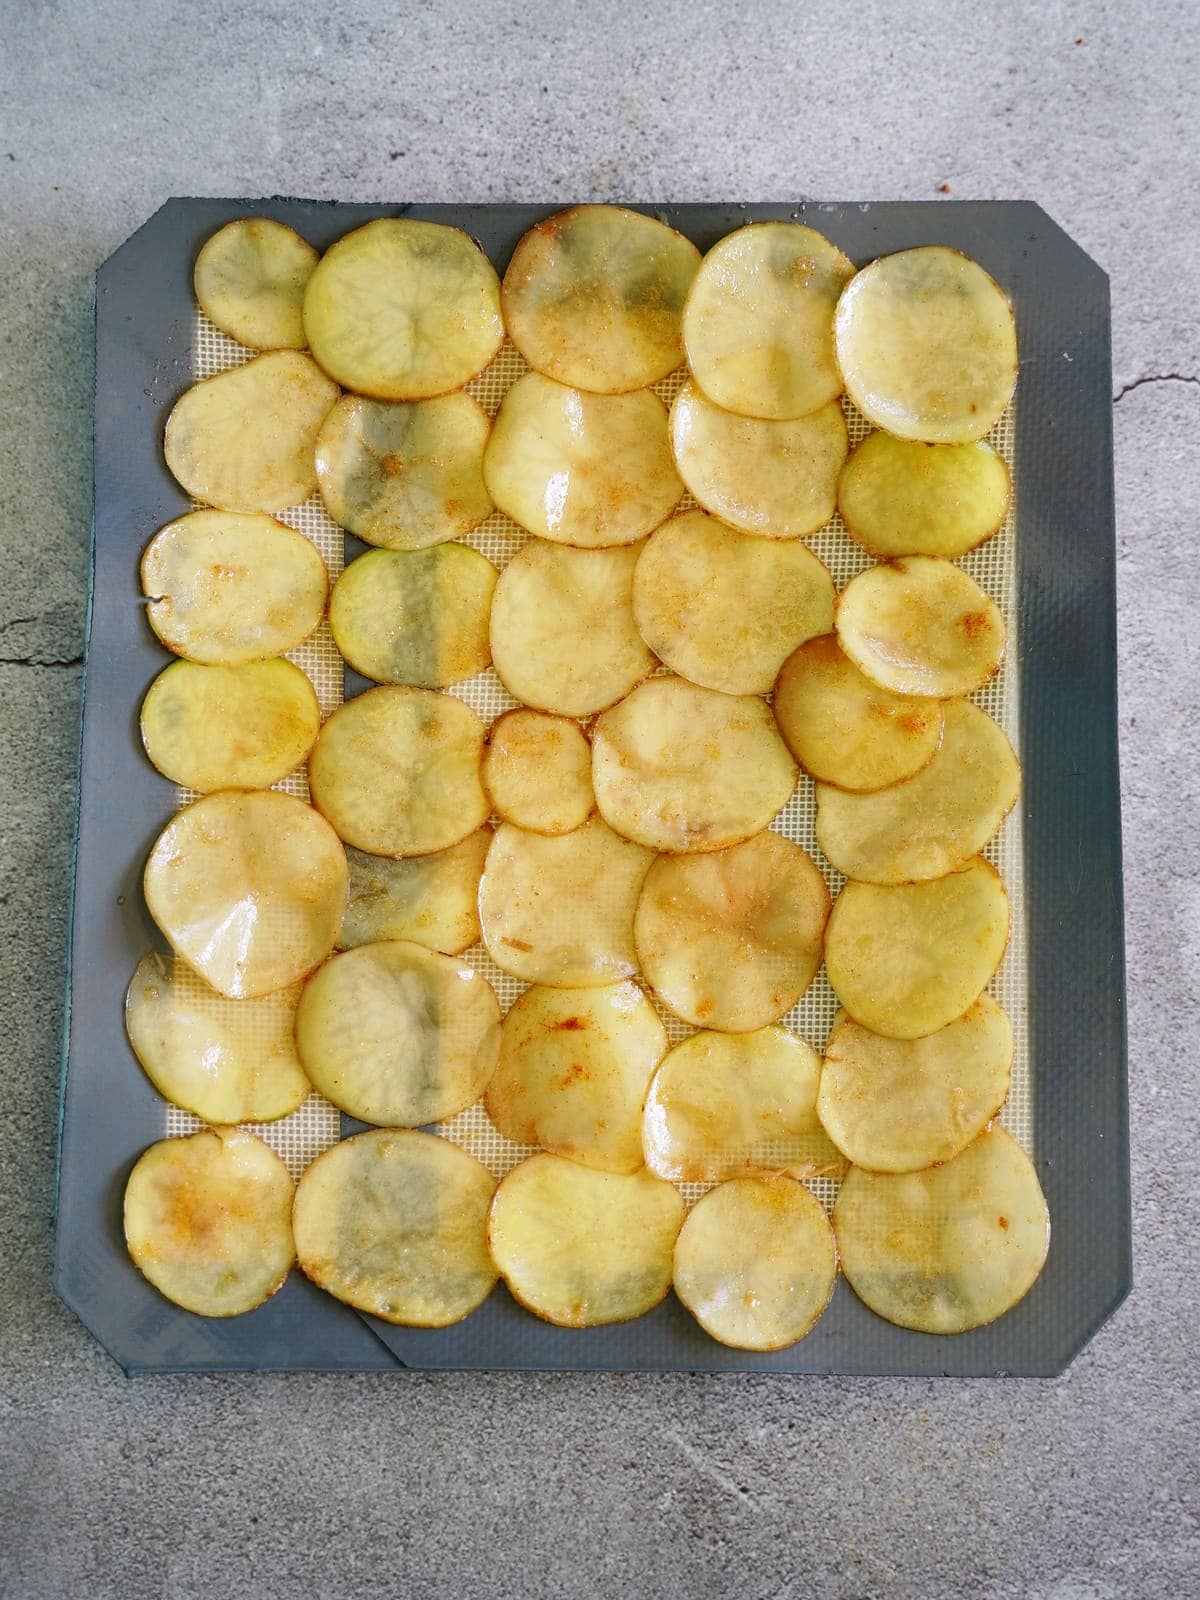 potato slices on silicone mat before baking